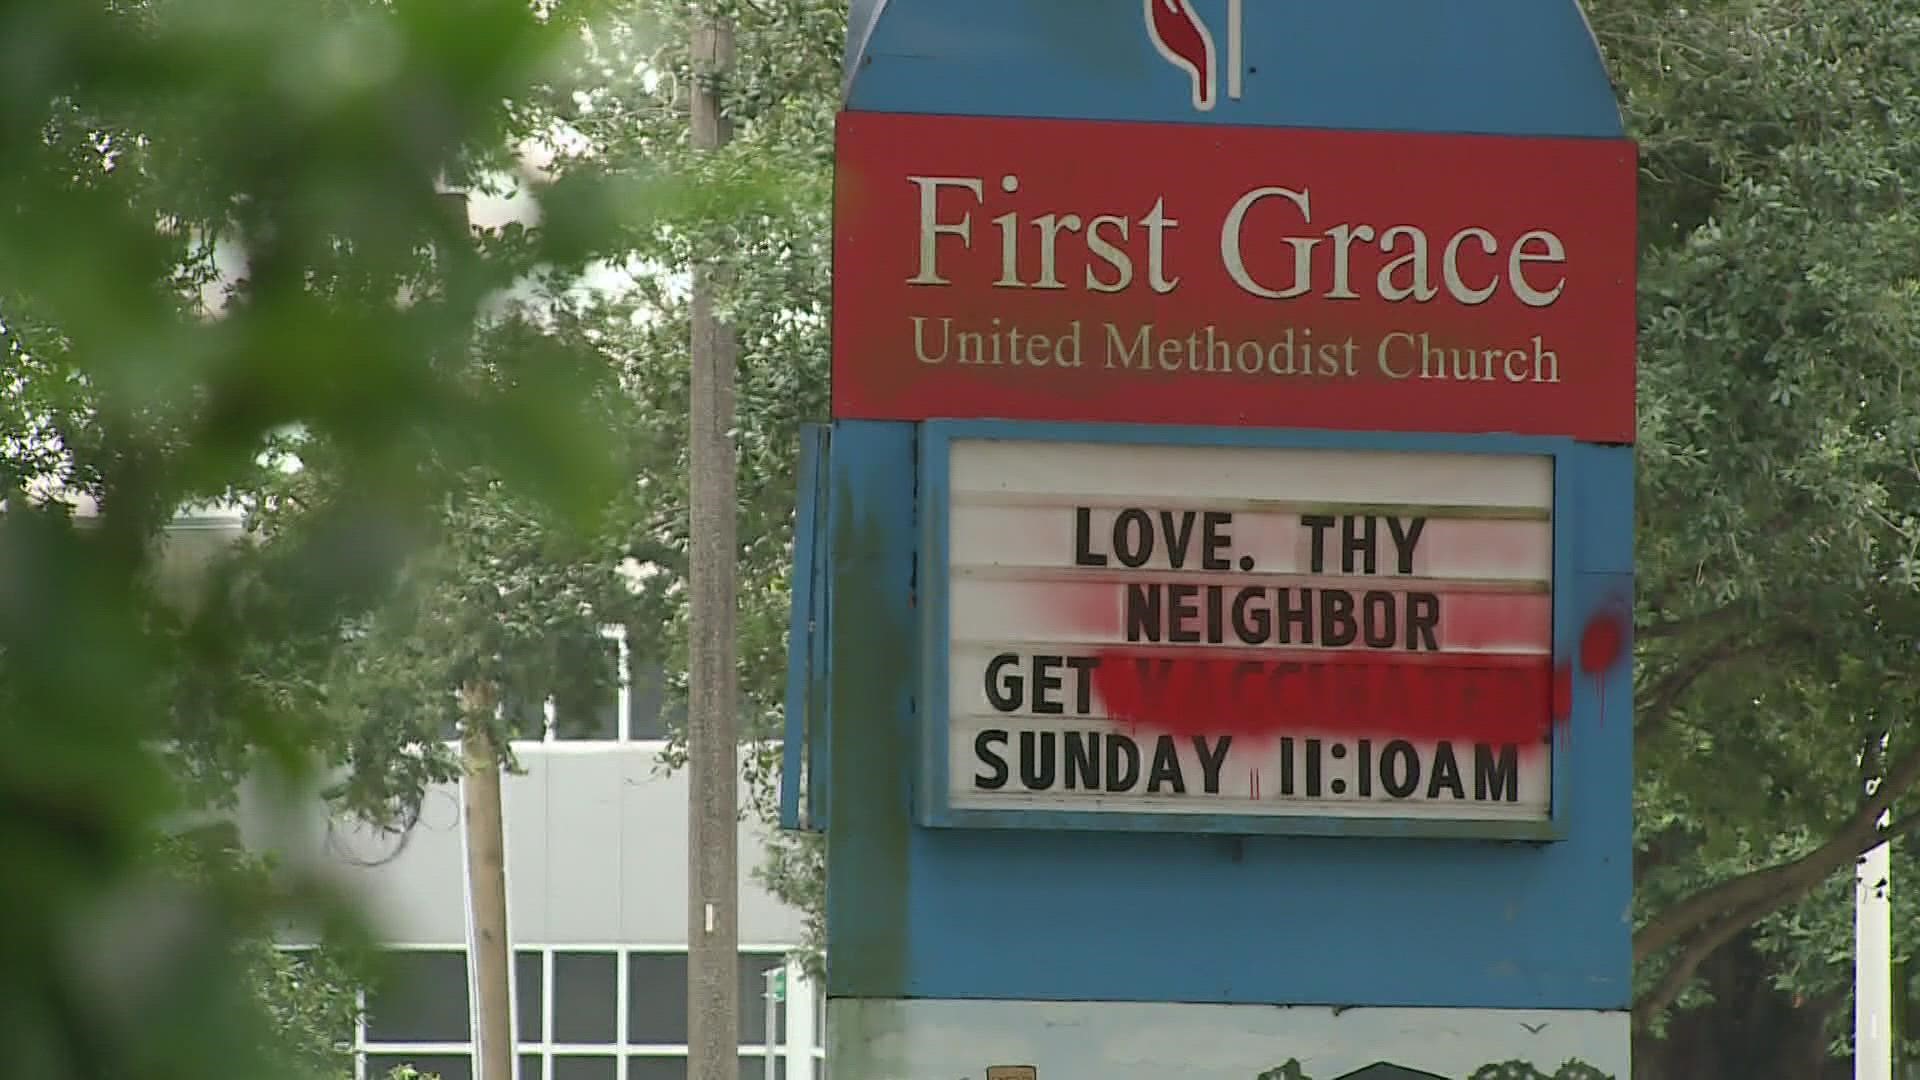 The pastor of a church said he is willing to talk to the person that spray-painted over his church's sign, promoting the covid vaccine.